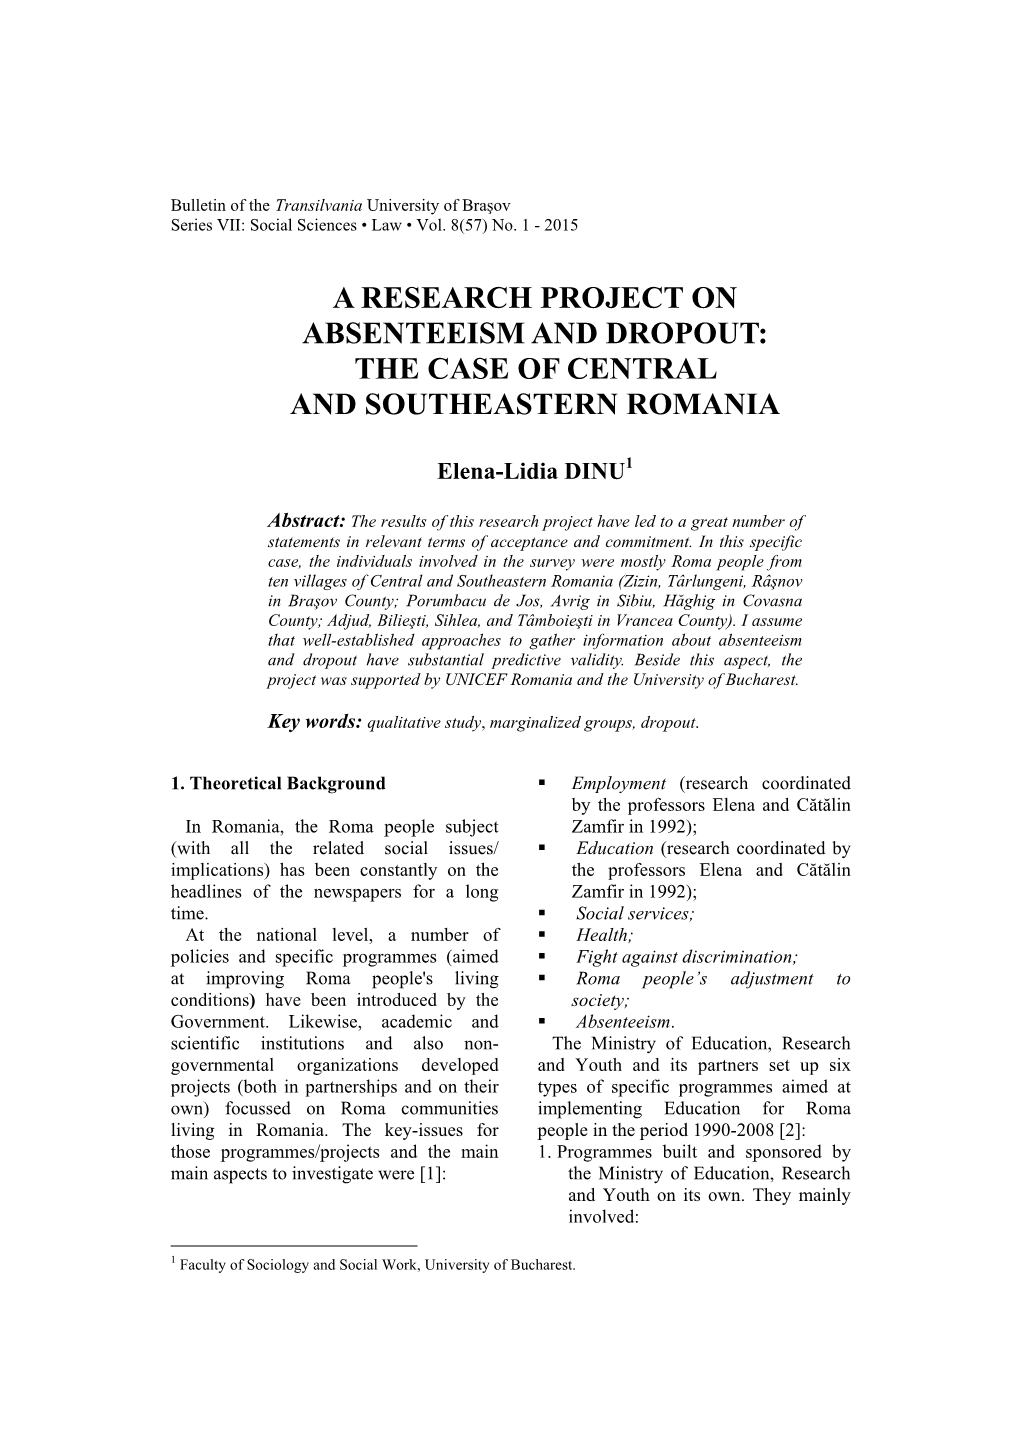 A Research Project on Absenteeism and Dropout: the Case of Central and Southeastern Romania